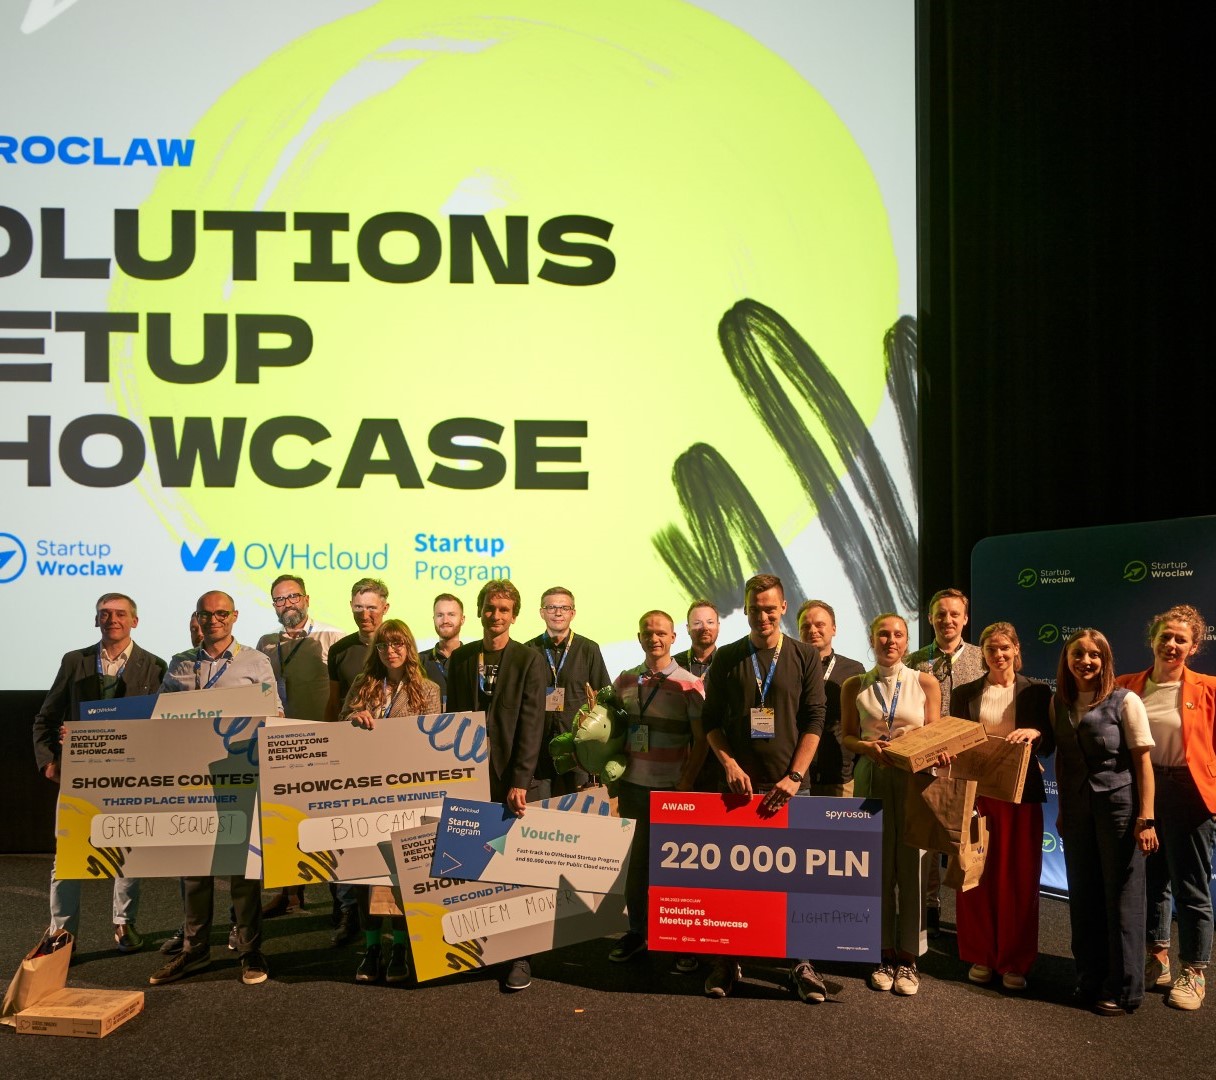 Green Sequest won the 3rd place in the startup competition at Evolutions 2023: Meetup & Showcase in Wrocław.